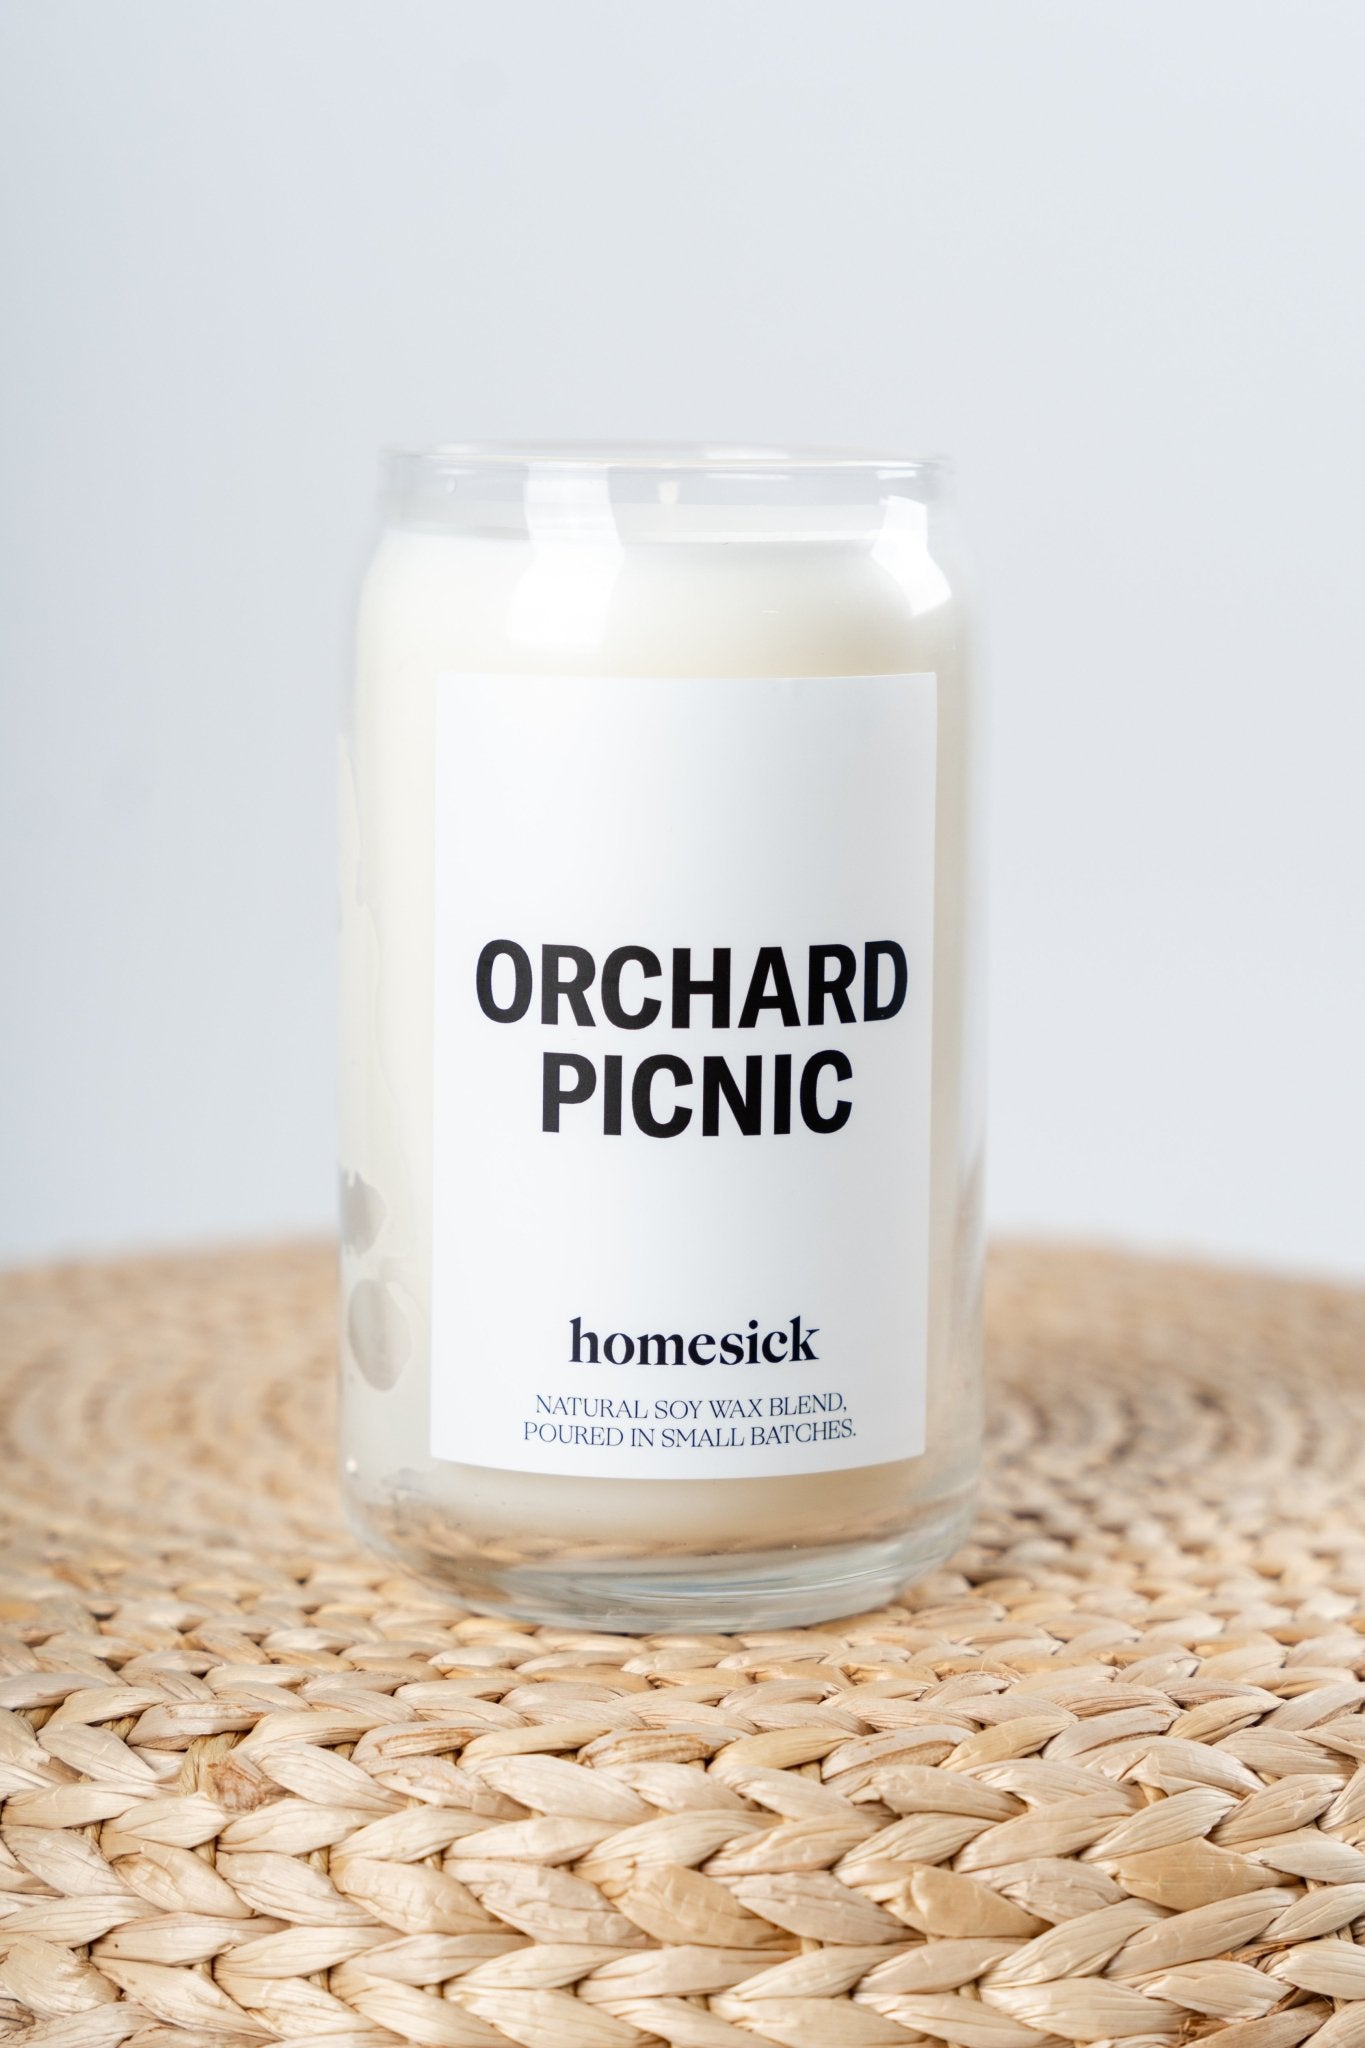 Homesick orchard picnic candle - Trendy Candles and Scents at Lush Fashion Lounge Boutique in Oklahoma City